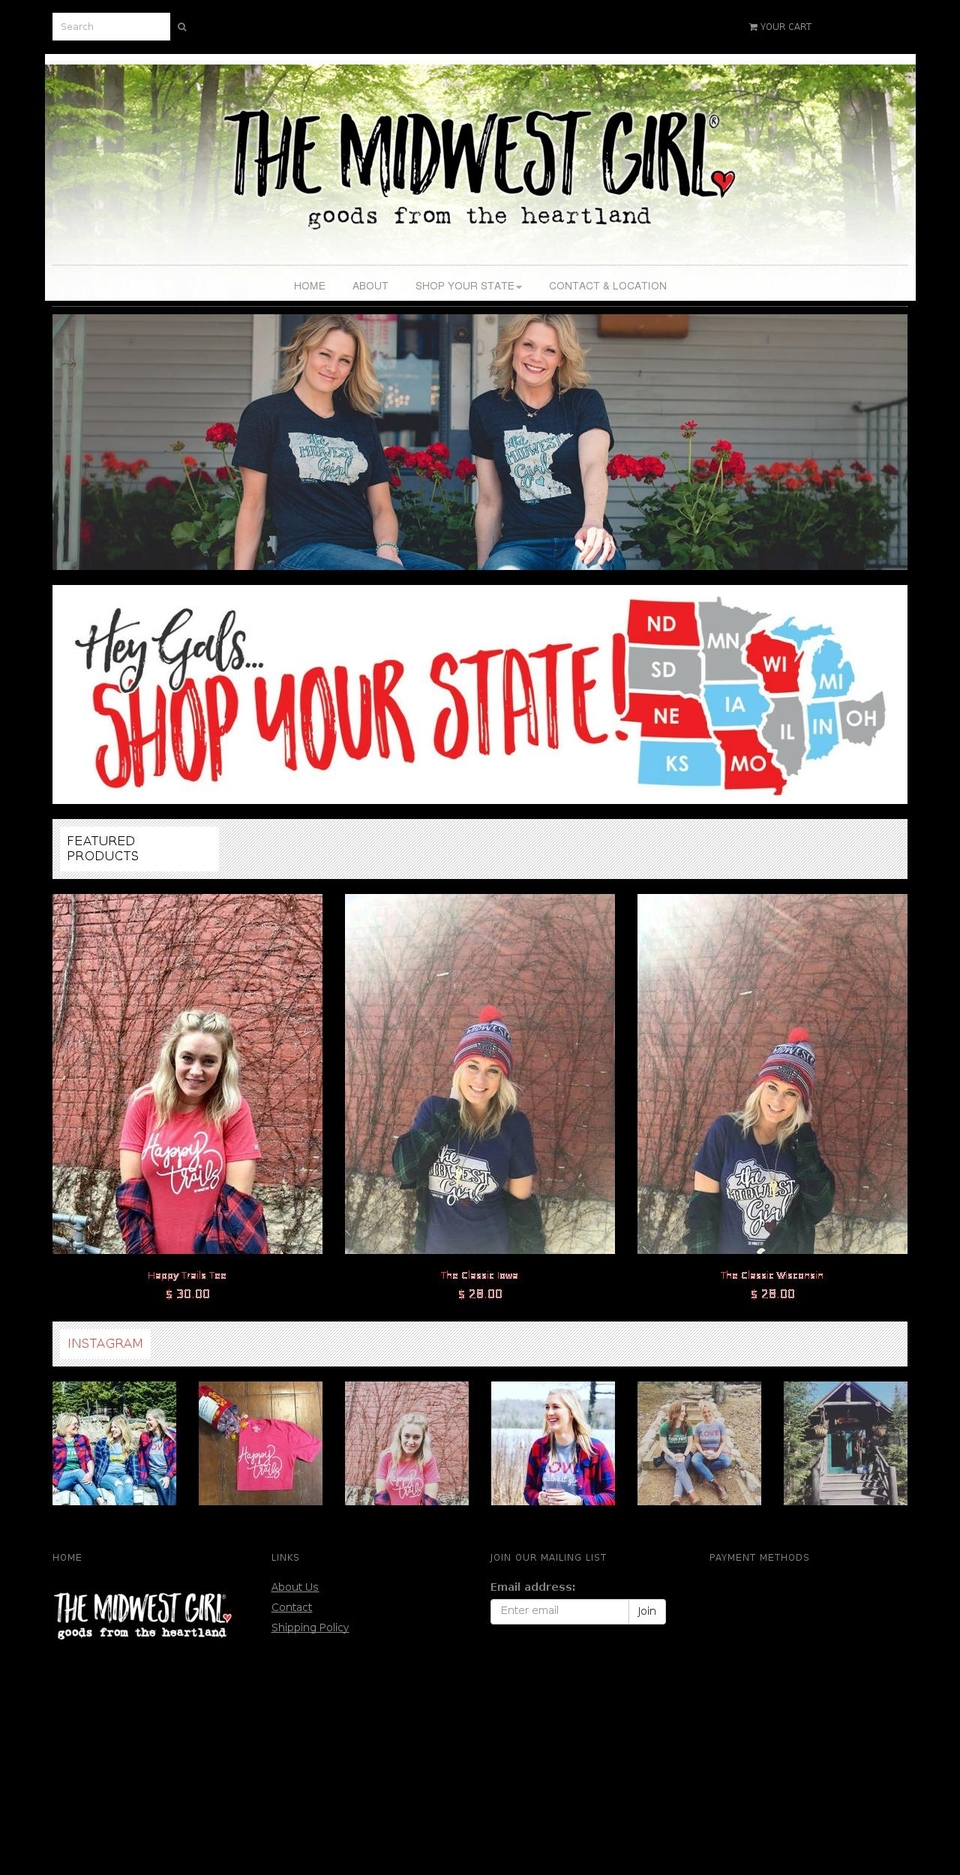 Colors Shopify theme site example shopthemidwestgirl.com